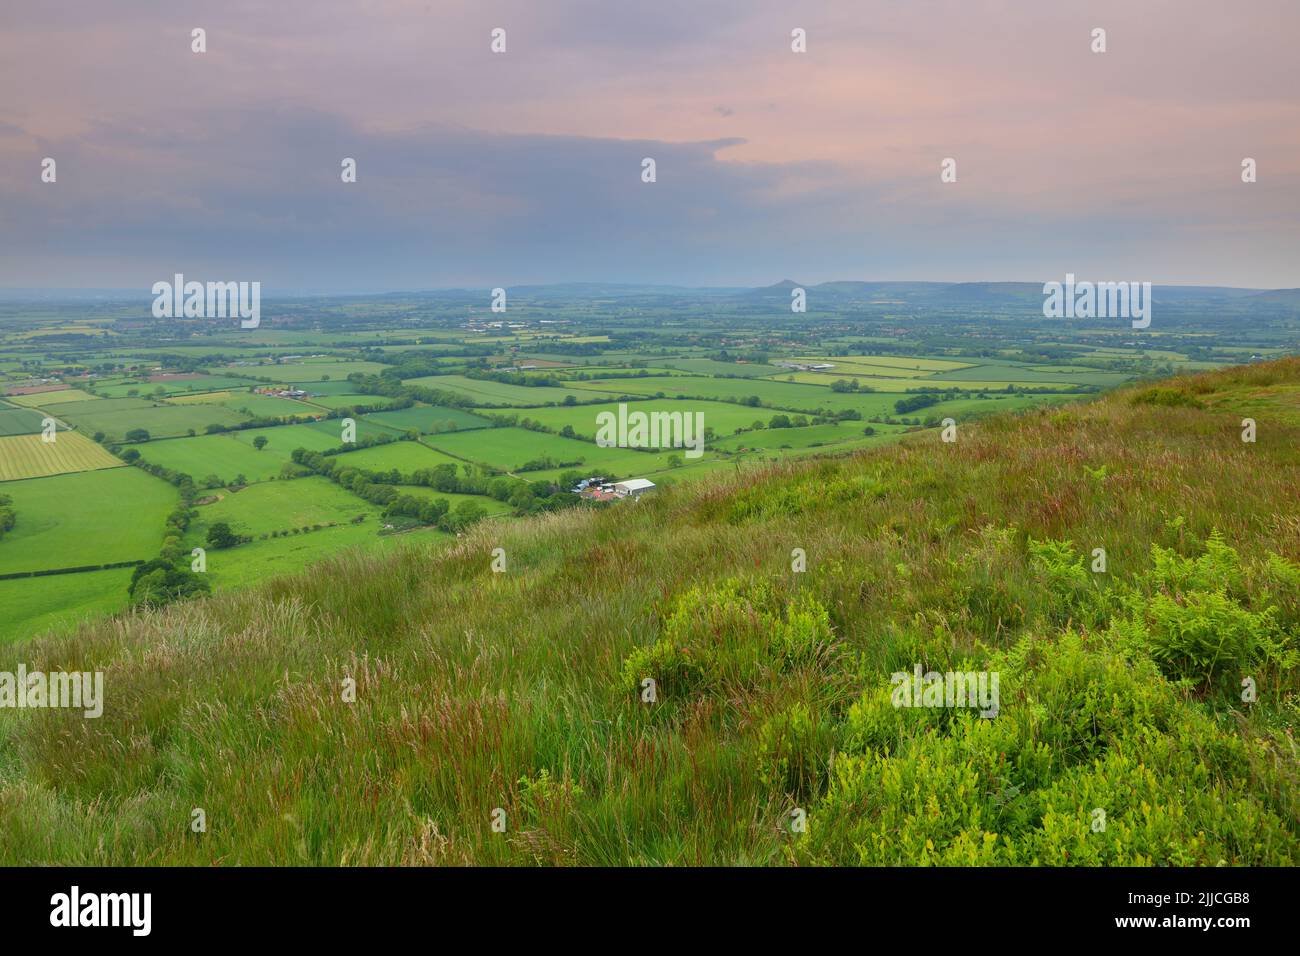 Landscape view from Carlton Bank looking towards Roseberry Topping, North Yorkshire Moors National Park, England, UK. Stock Photo